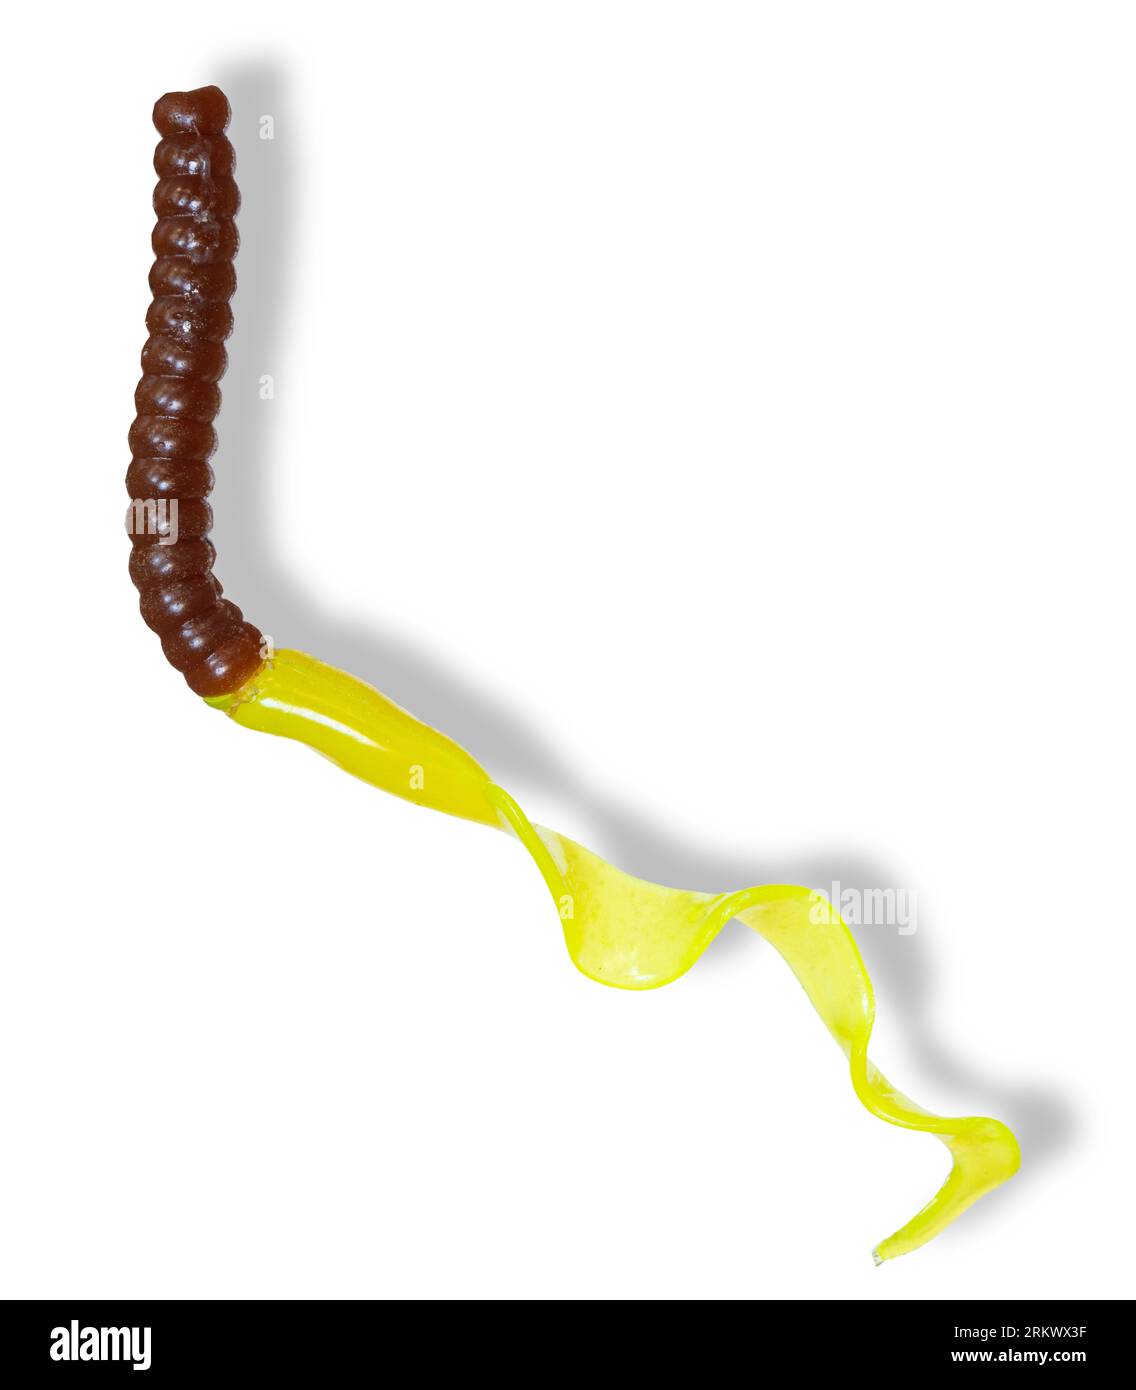 Brown and yellow artificial worm for fishing with a curly tail and